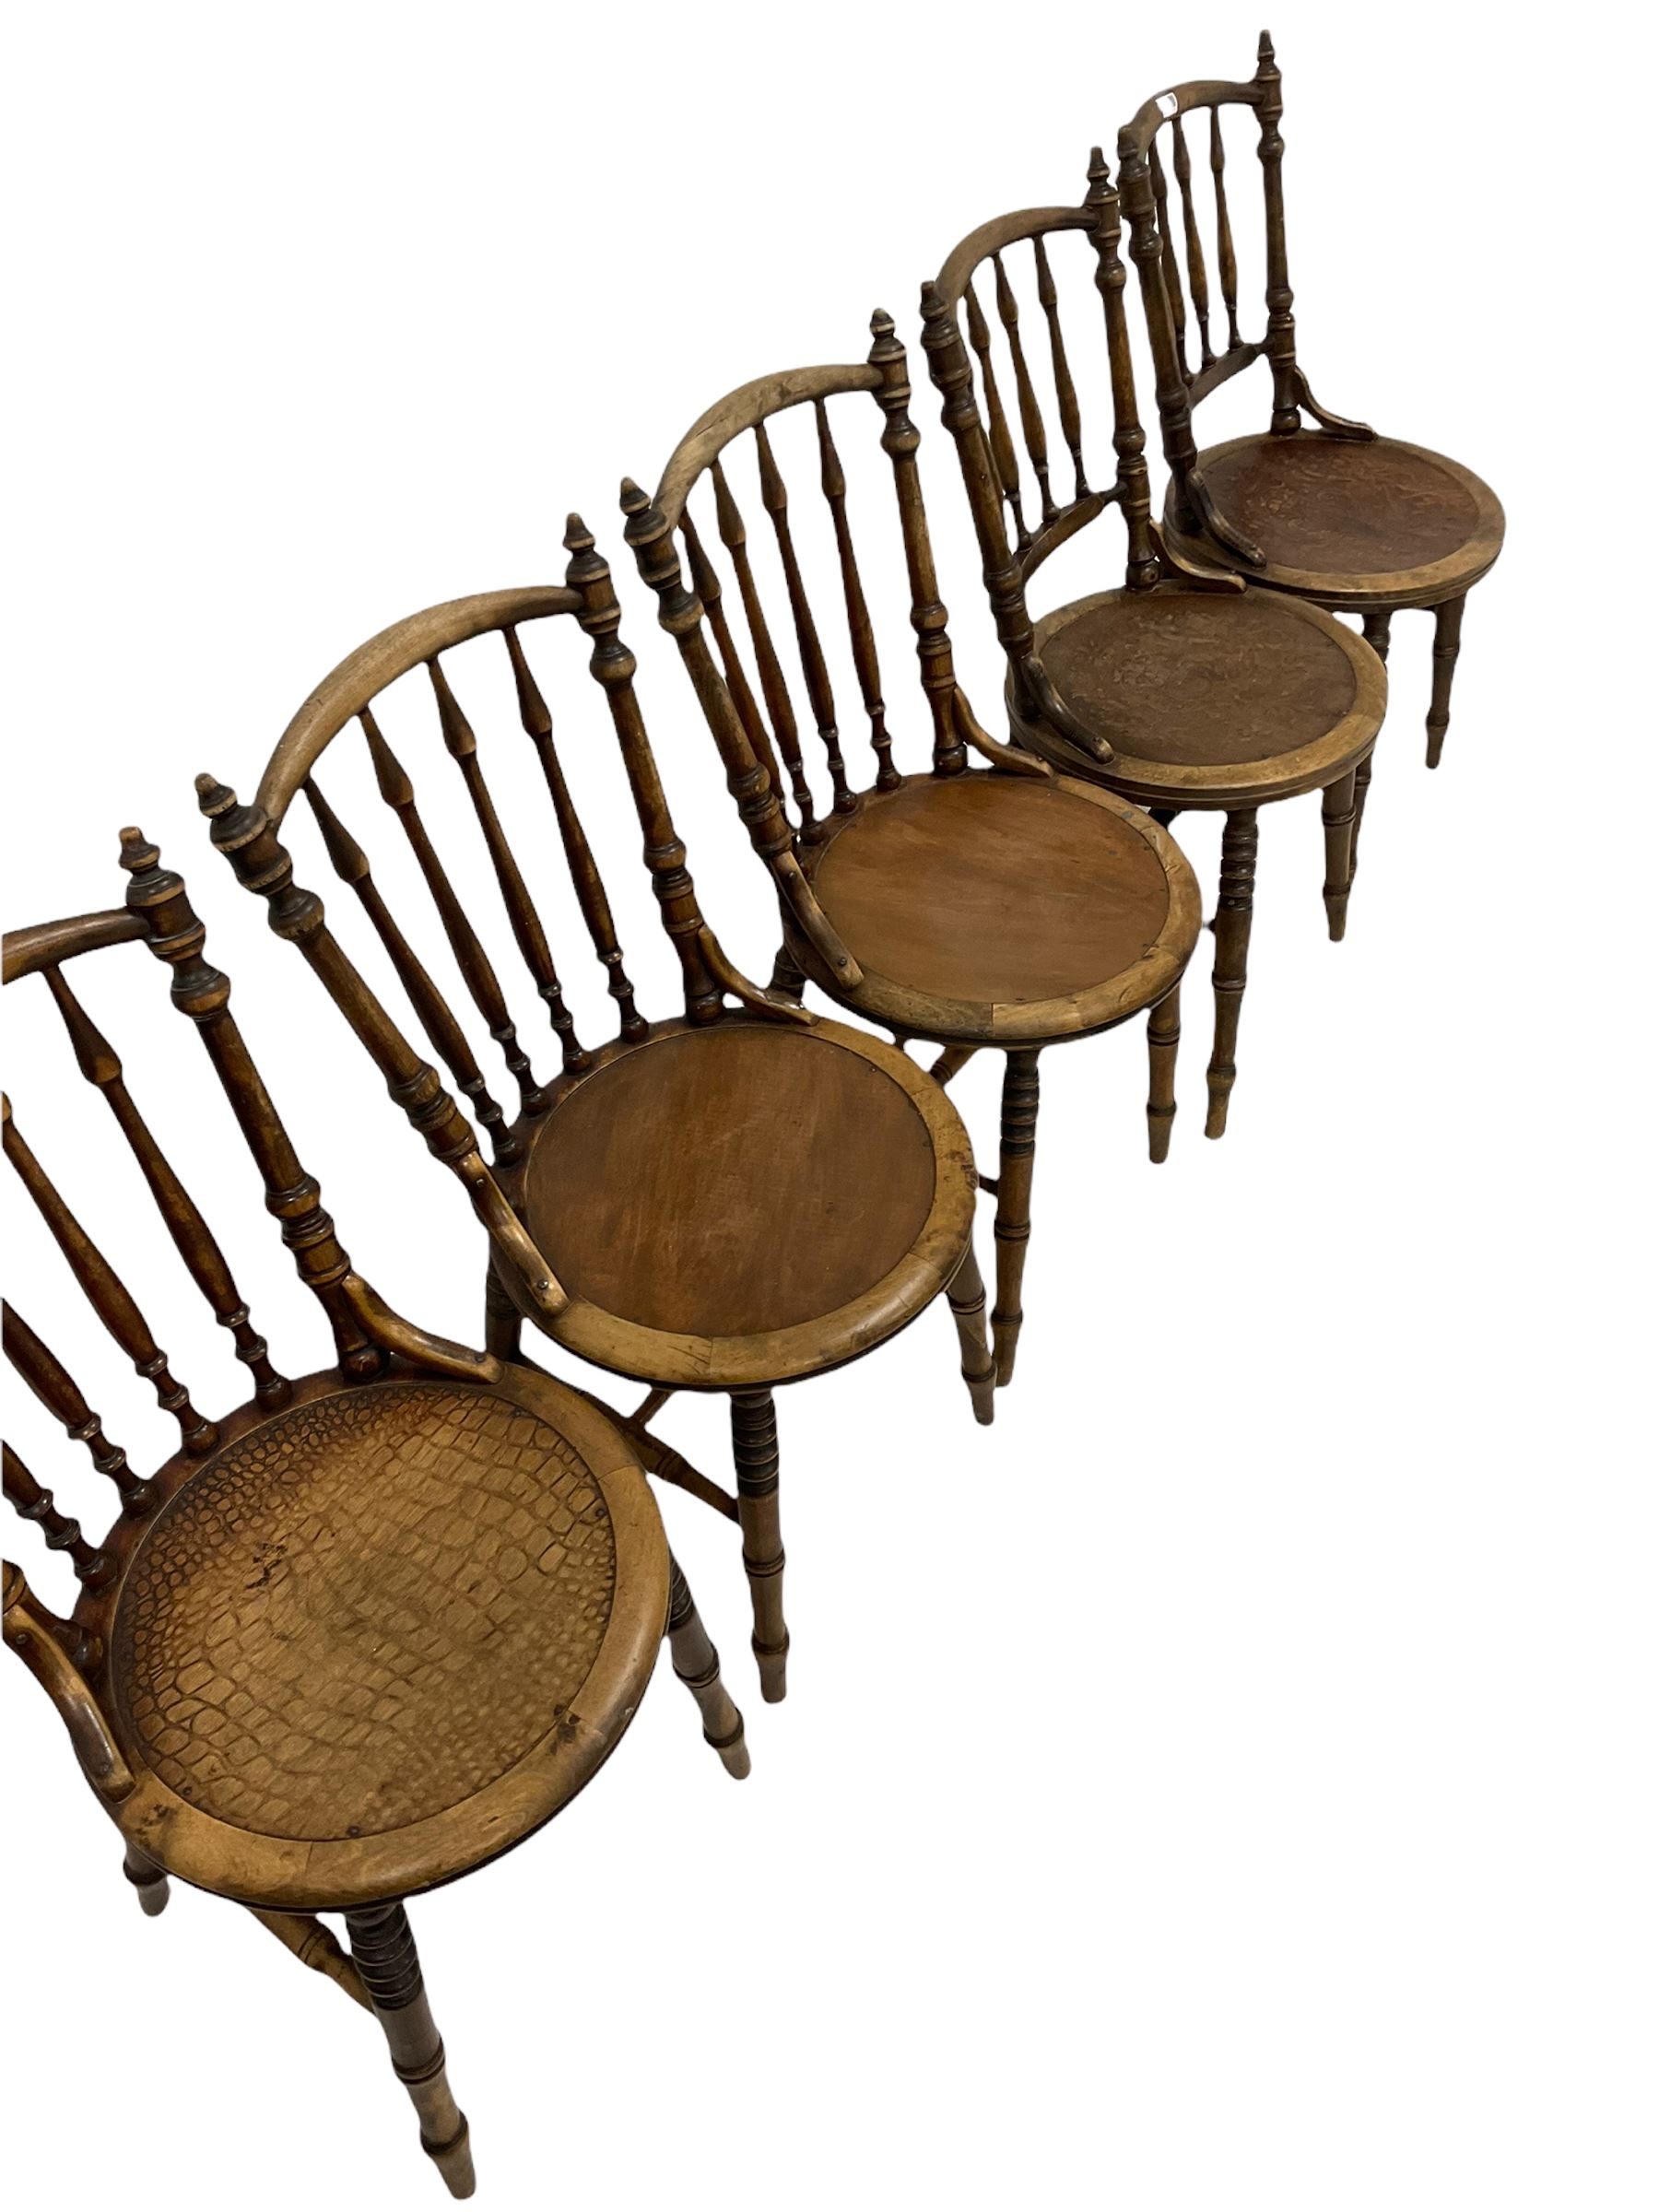 Pair of bentwood chairs - Image 2 of 2